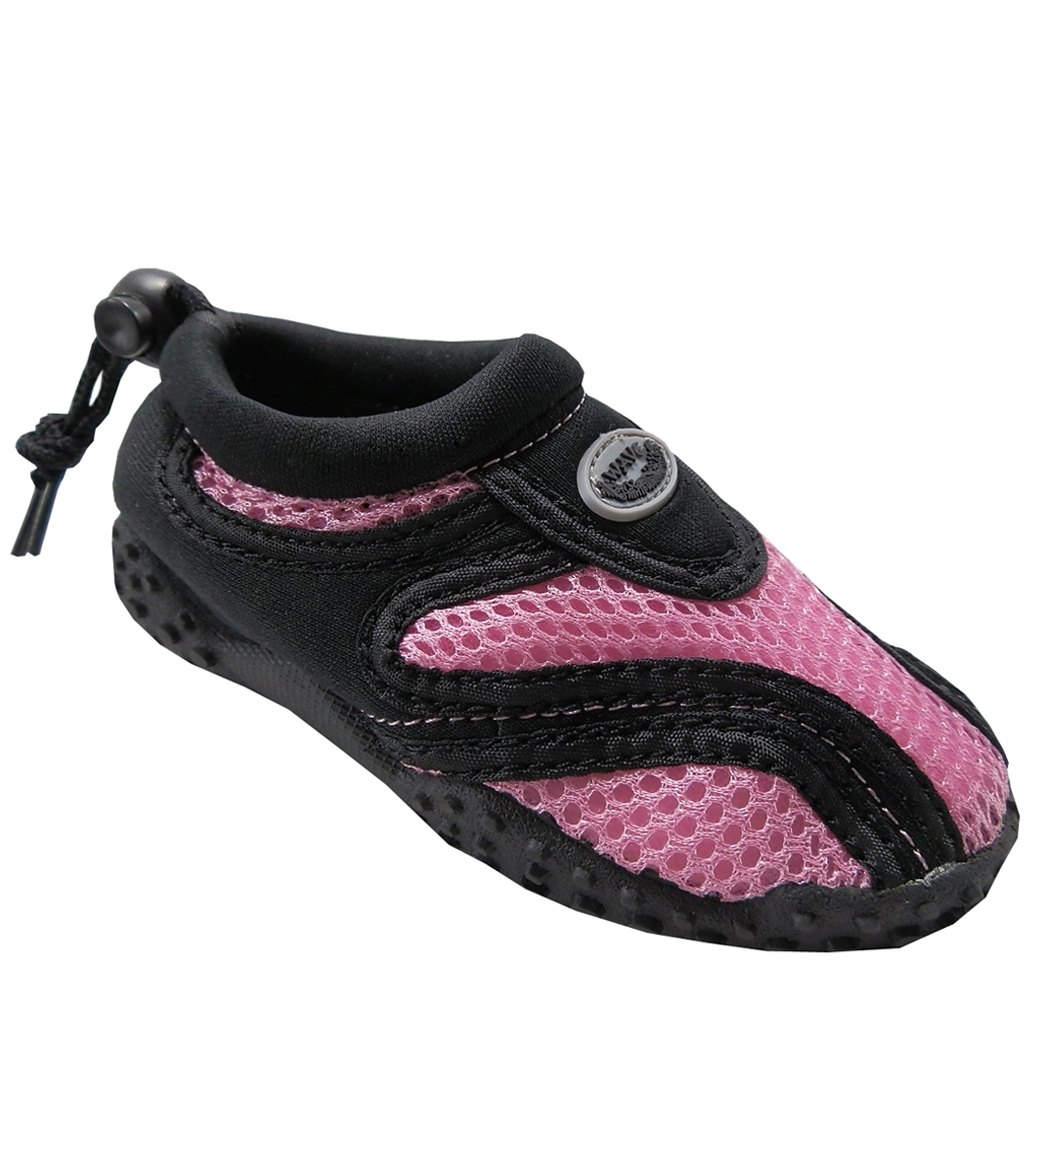 Easy Usa Kids' Water Shoes - Black/Pink 11 - Swimoutlet.com